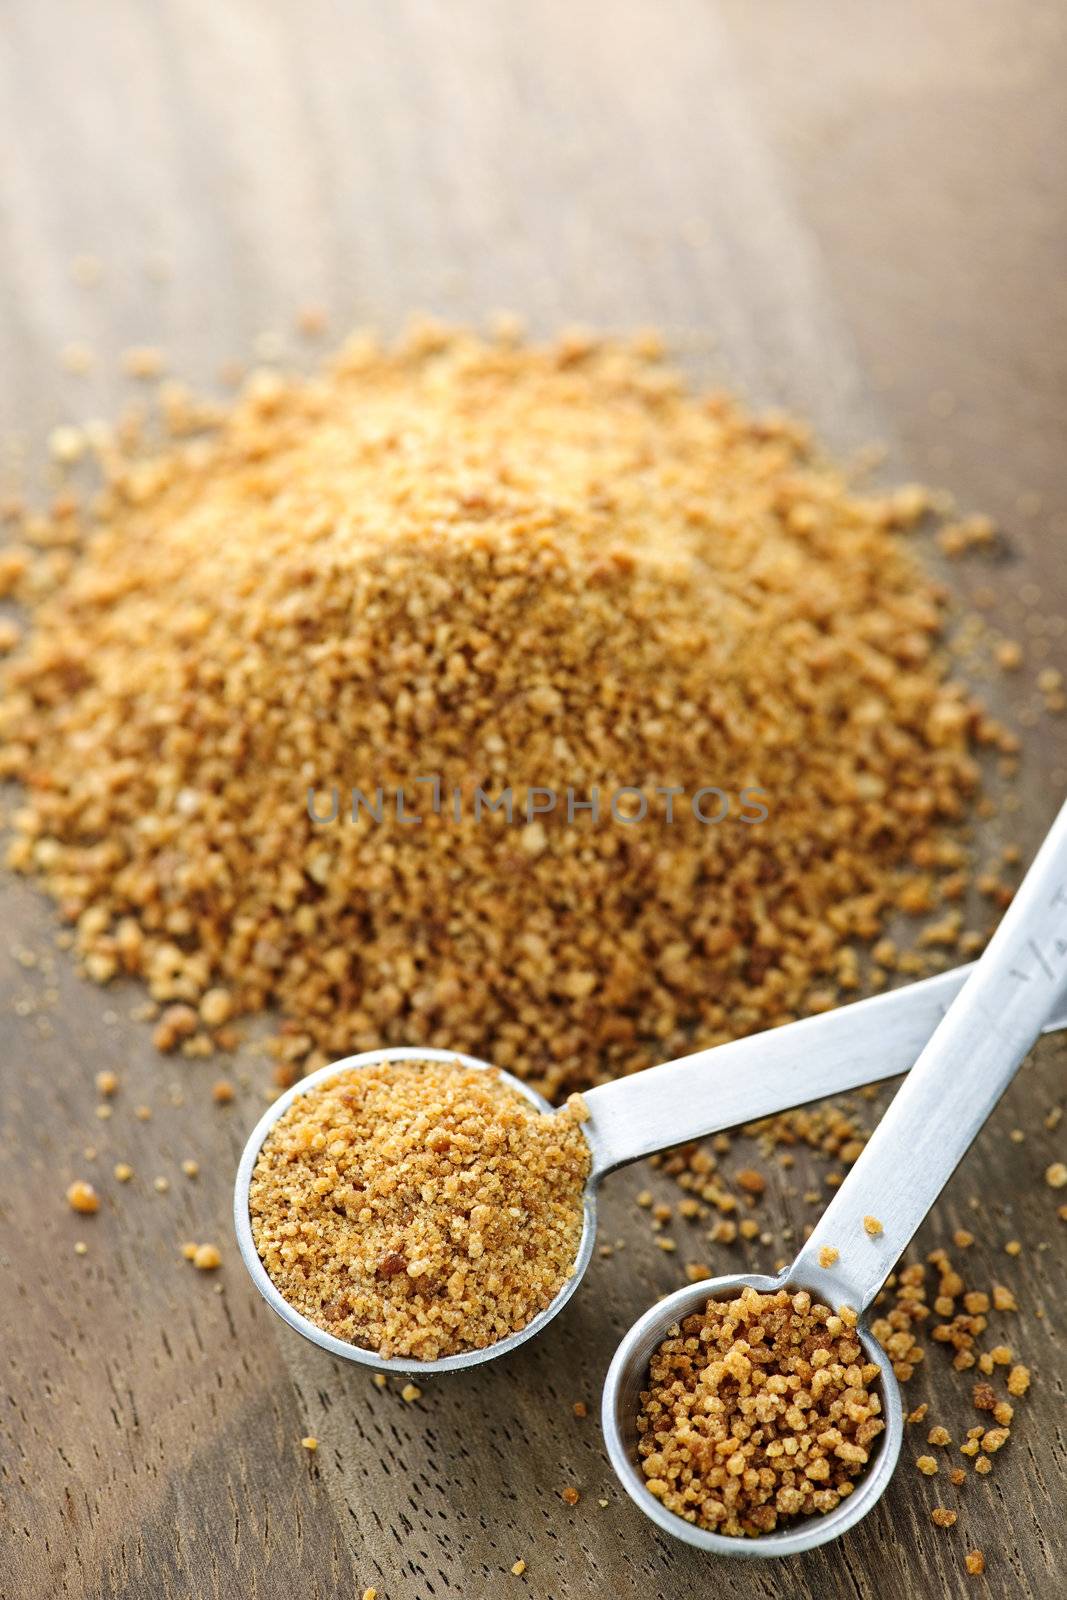 Coconut palm sugar in measuring spoons by elenathewise